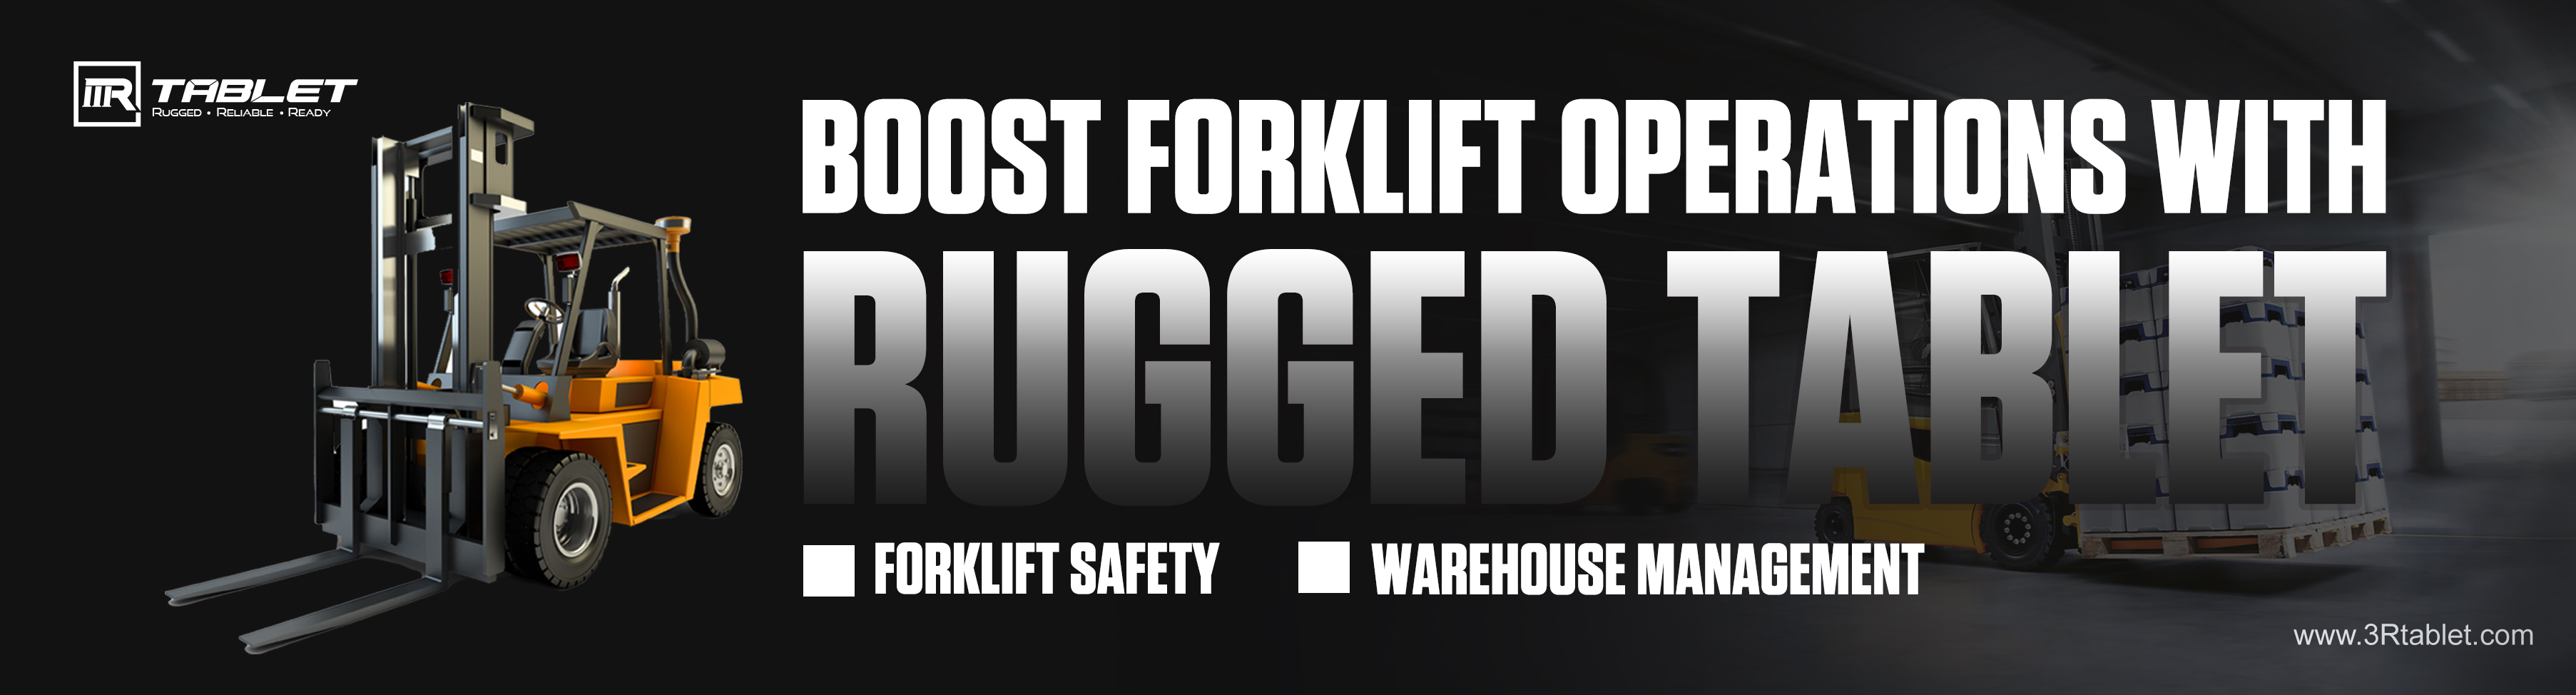 Enhancing Forklift Safety and Warehouse Management with Rugged Tablets